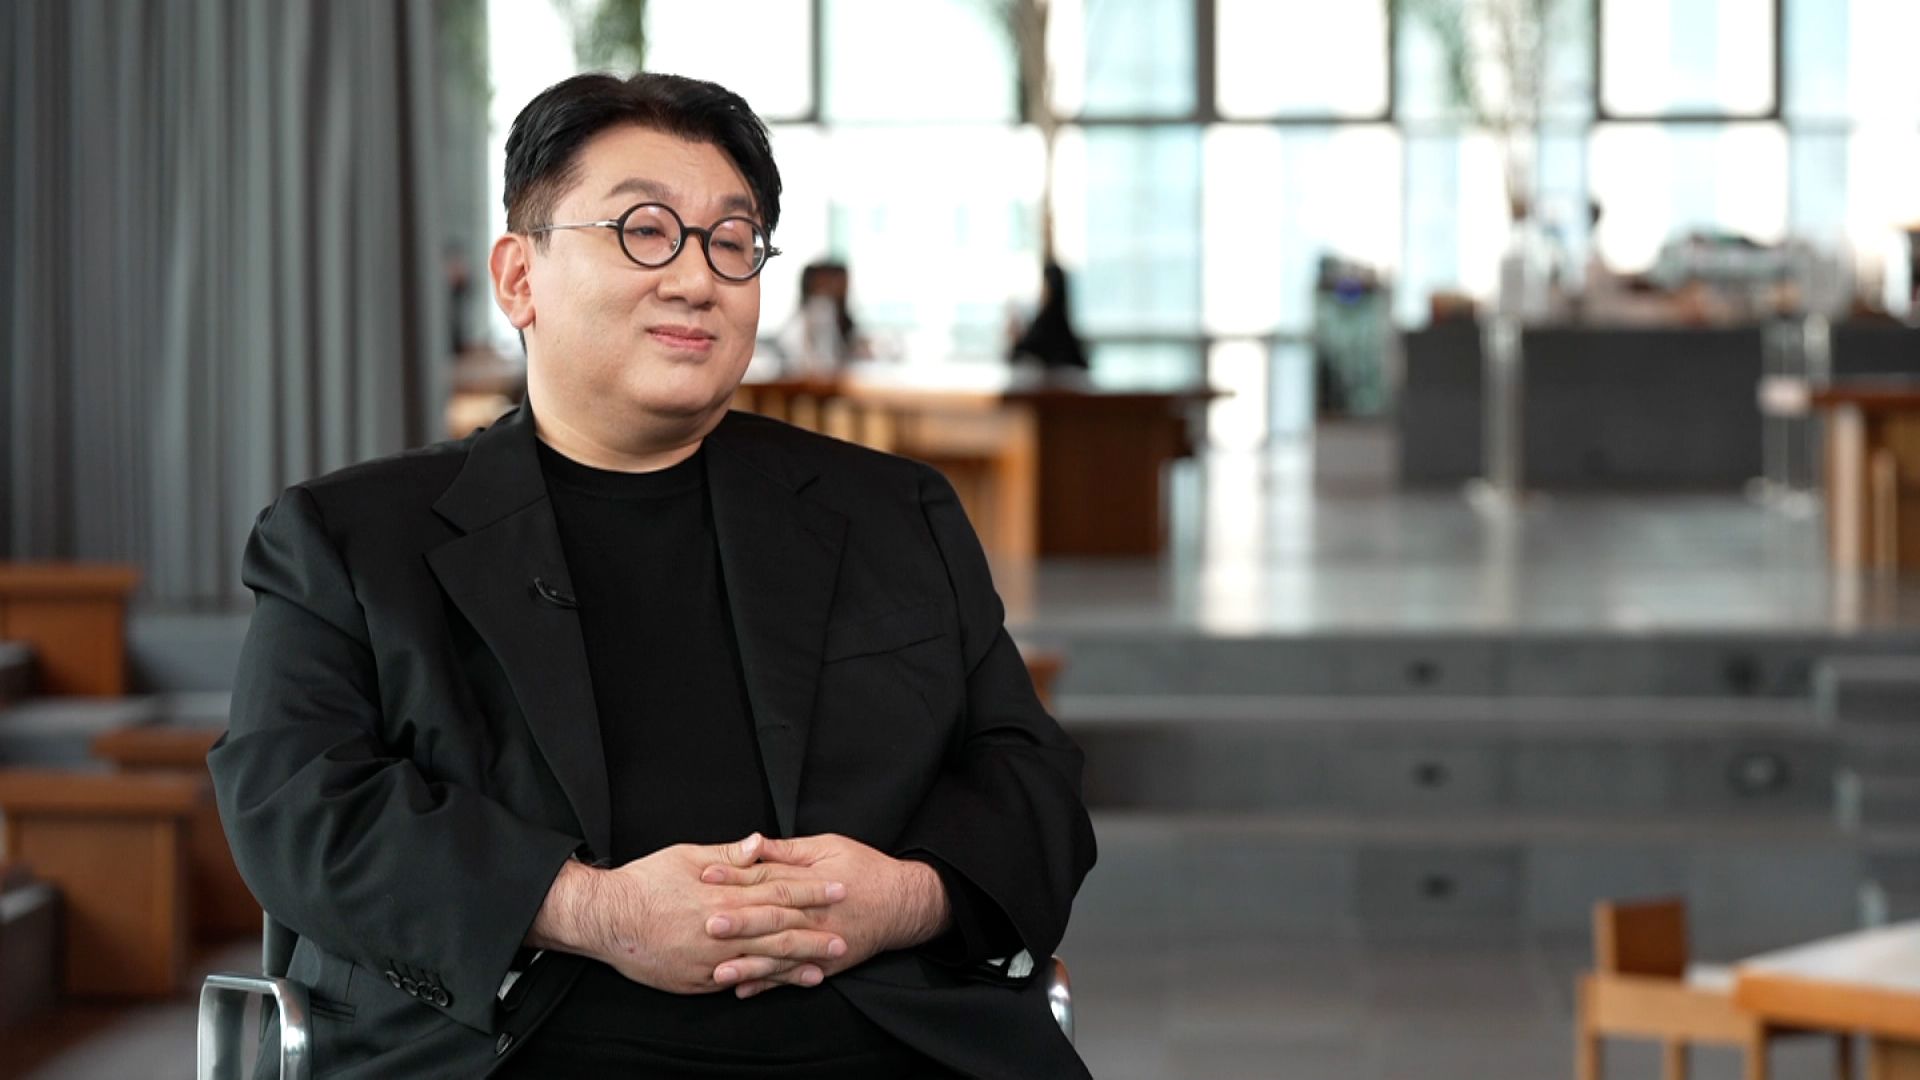 Kakao wins control of SM Entertainment, one of South Korea's most iconic  music agencies